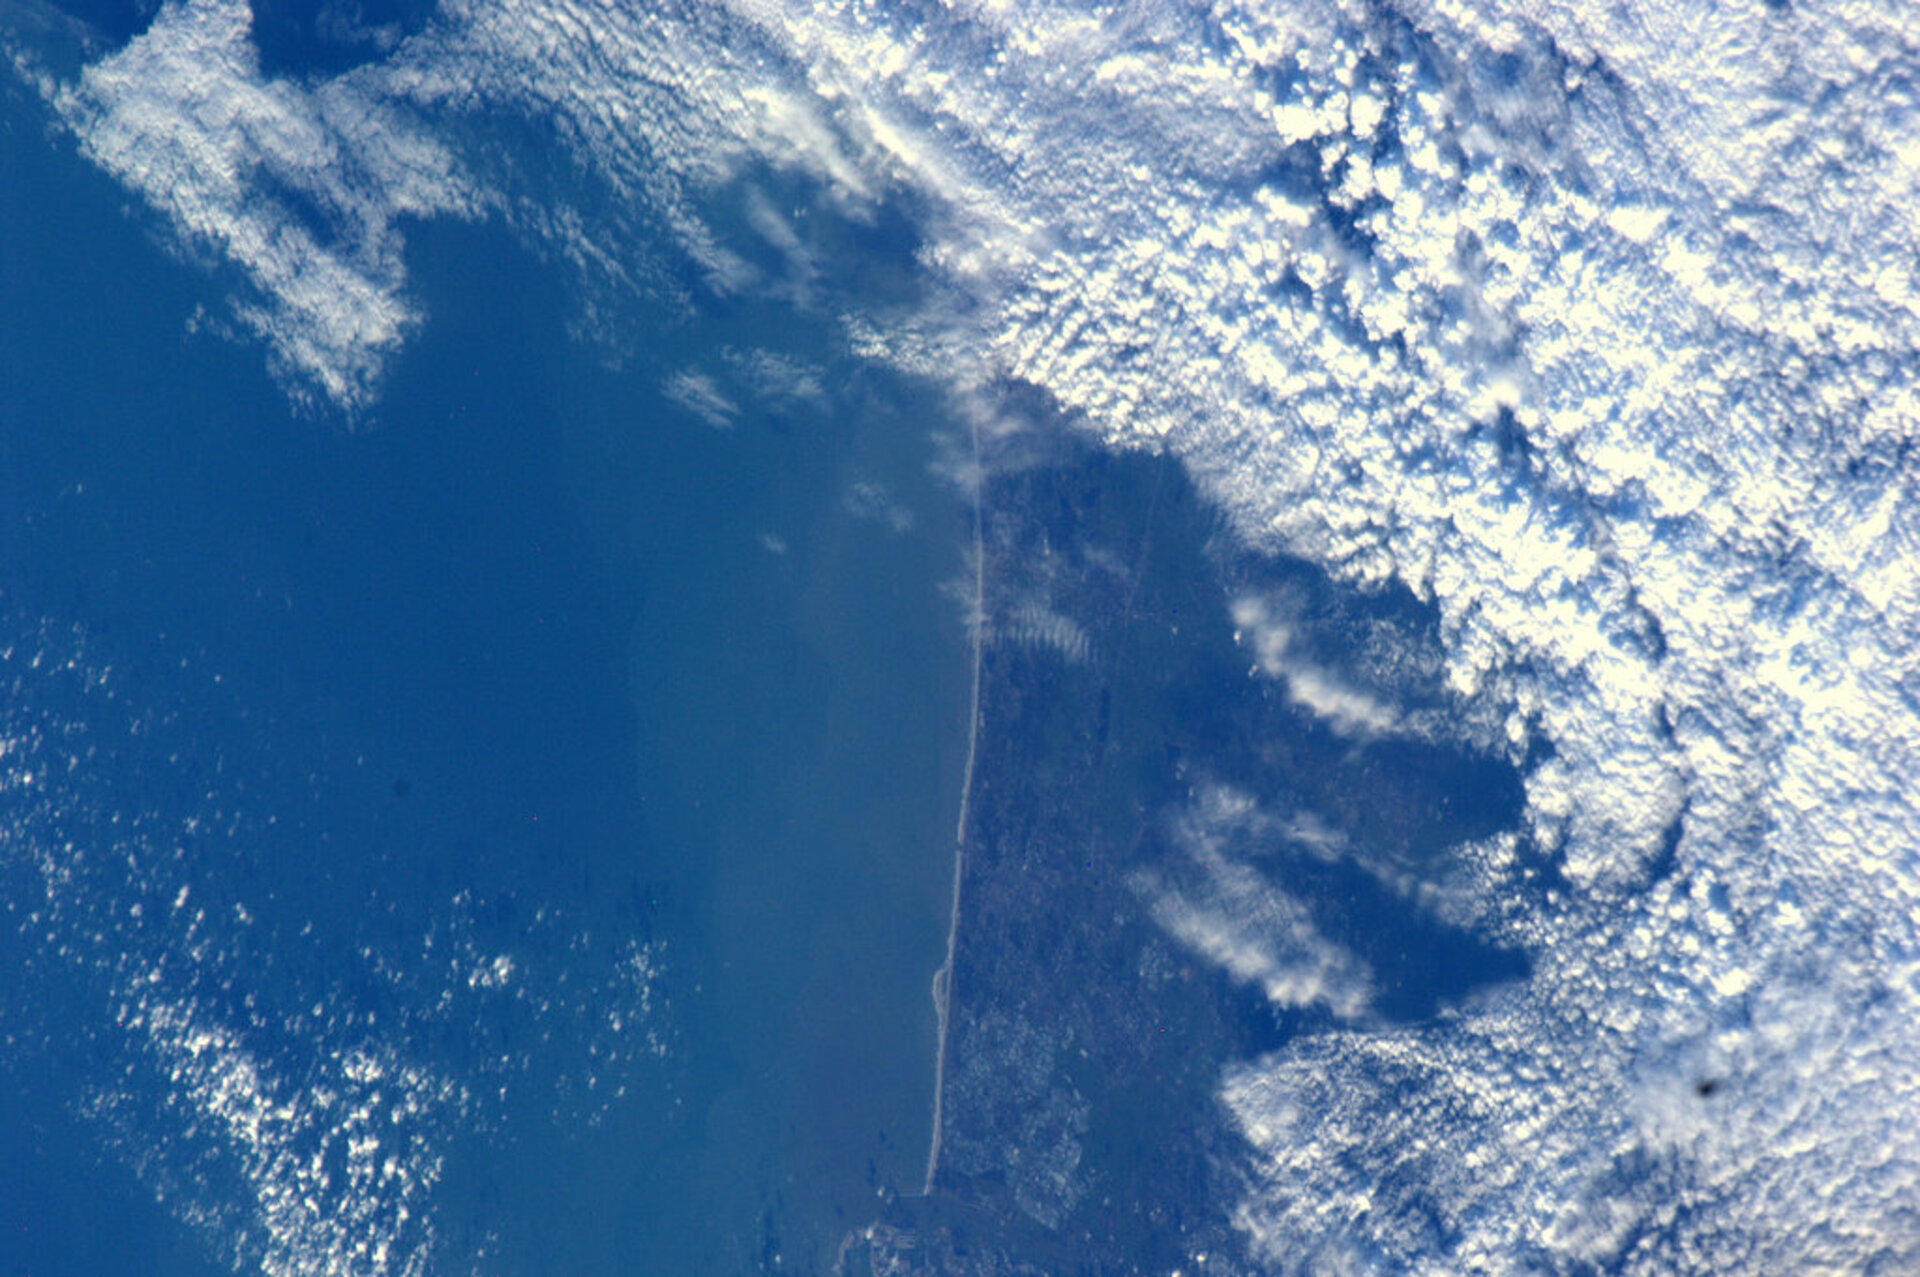 The Dutch coastline, as seen from the ISS